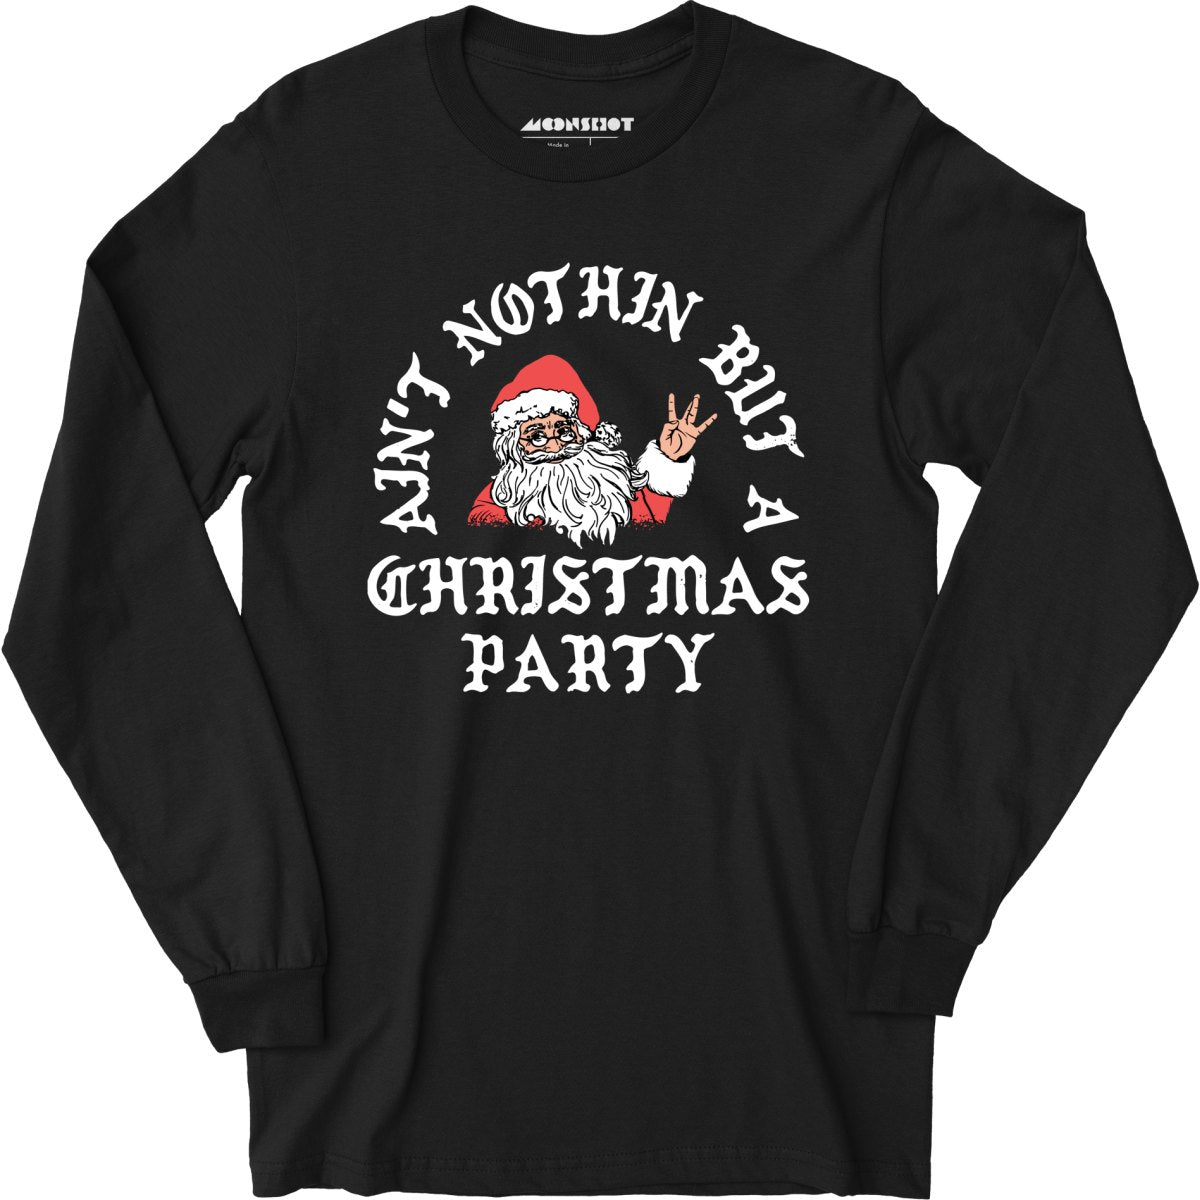 Ain't Nothin' But a Christmas Party - Long Sleeve T-Shirt